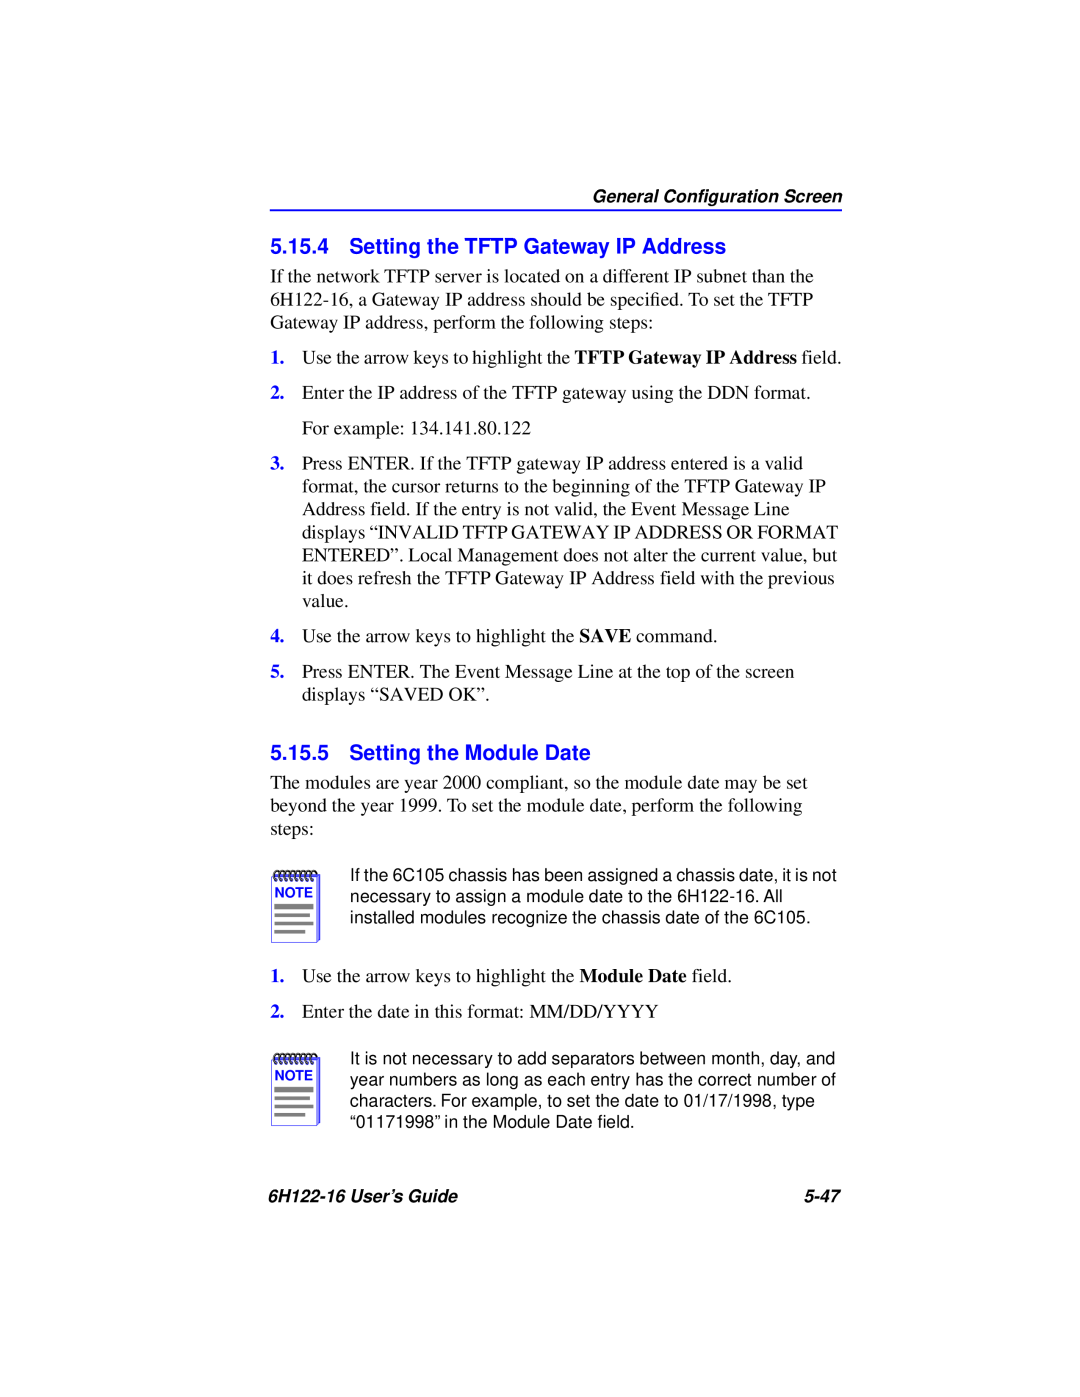 Cabletron Systems 6H122-16 manual Setting the TFTP Gateway IP Address, Setting the Module Date 